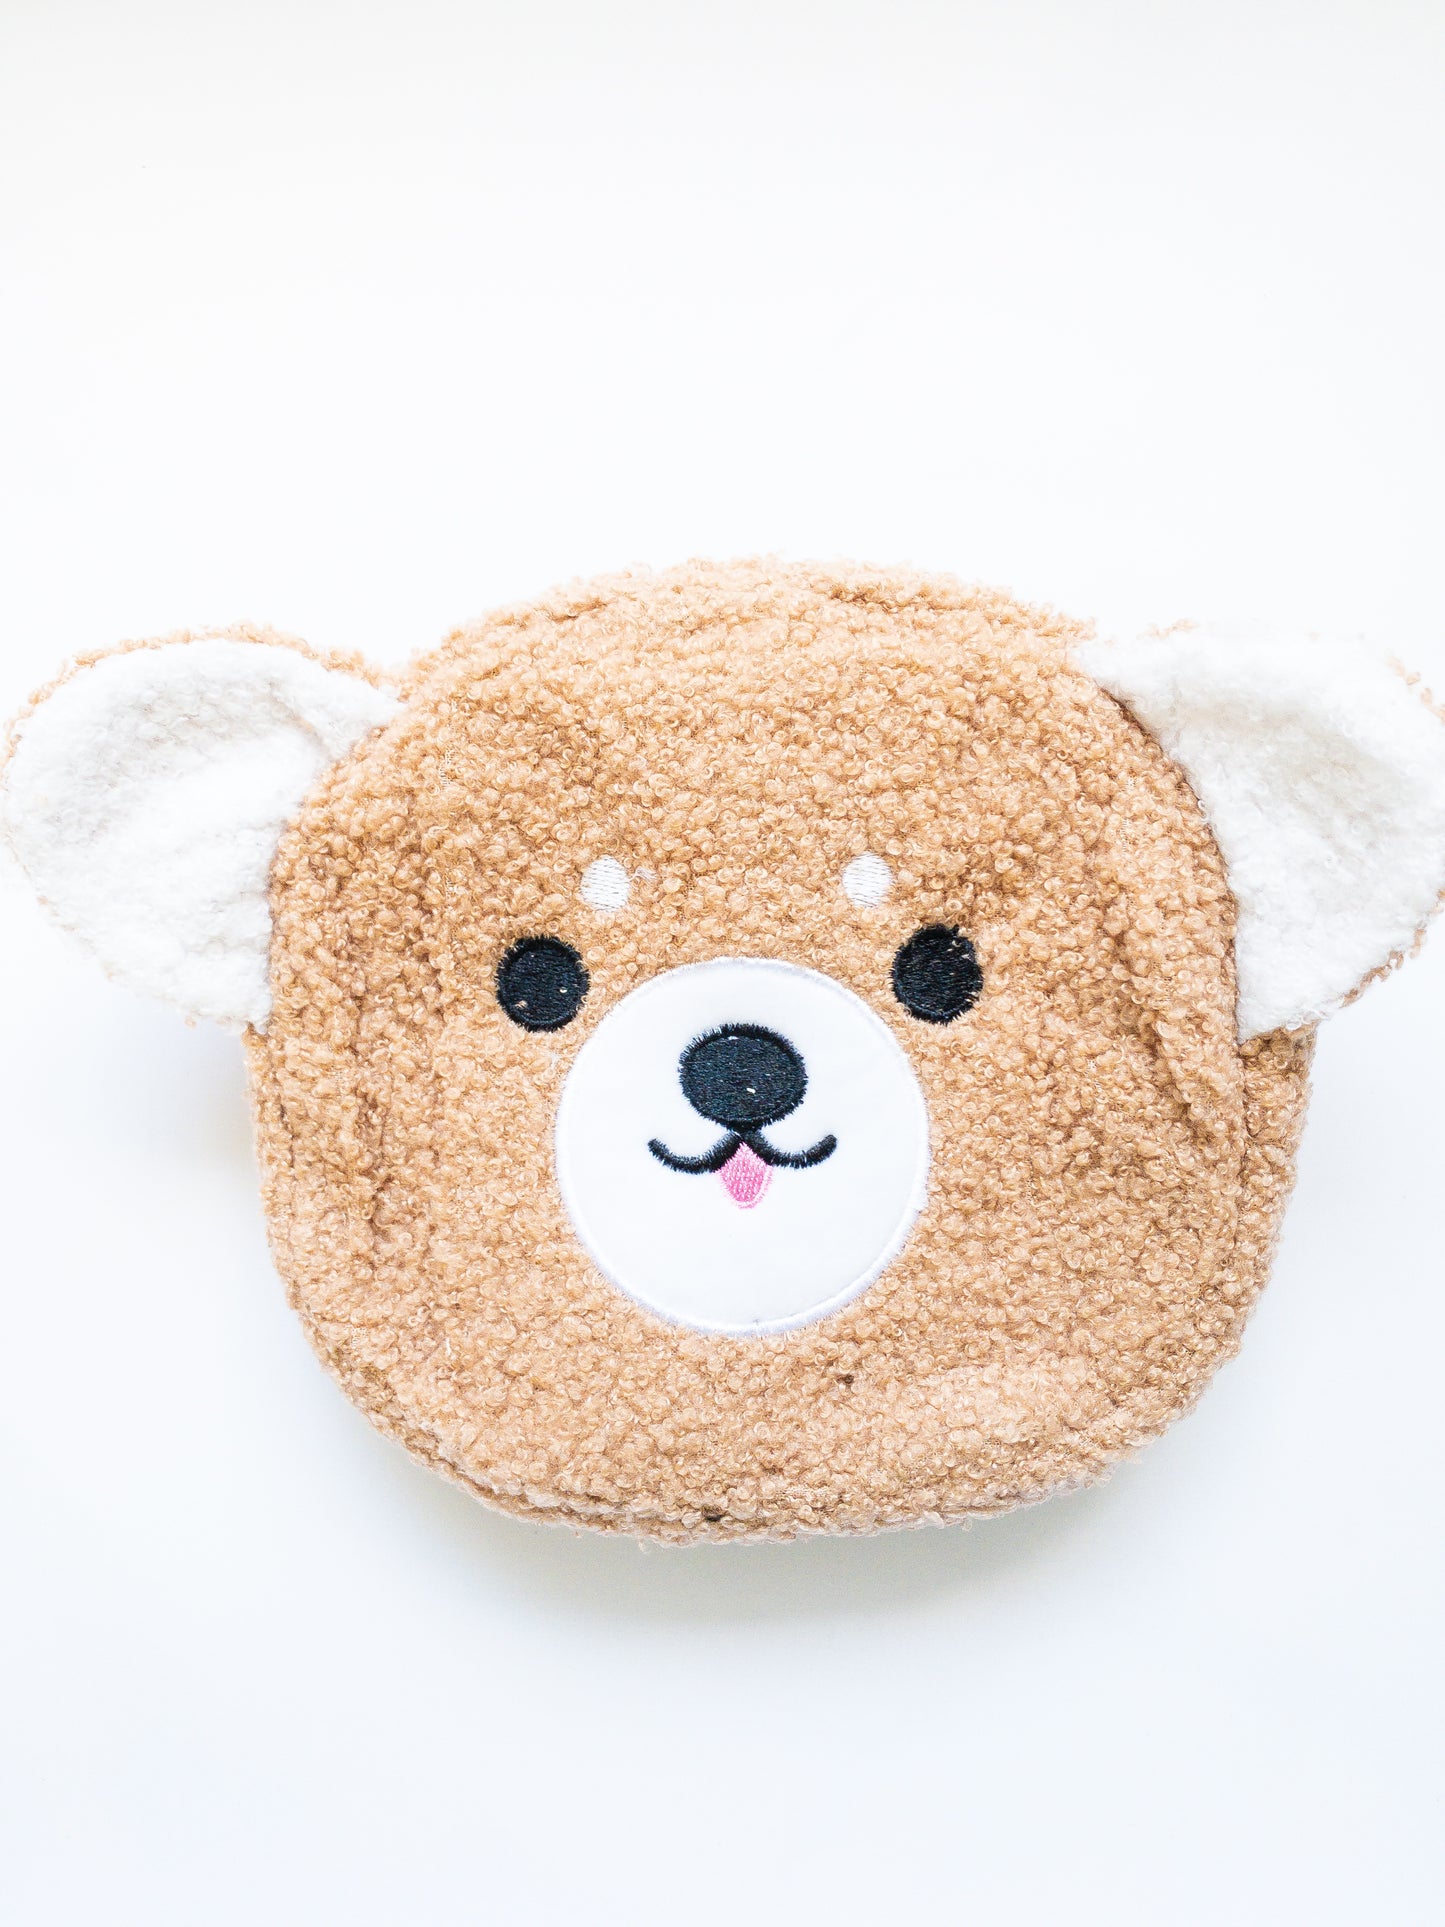 This soft, sherpa, fuzzy happy faced Shiba Inu bag is just the cutest! Fabric strap is adjustable and removable. One zip open to a single compartment purse. Great length and size for kids! 